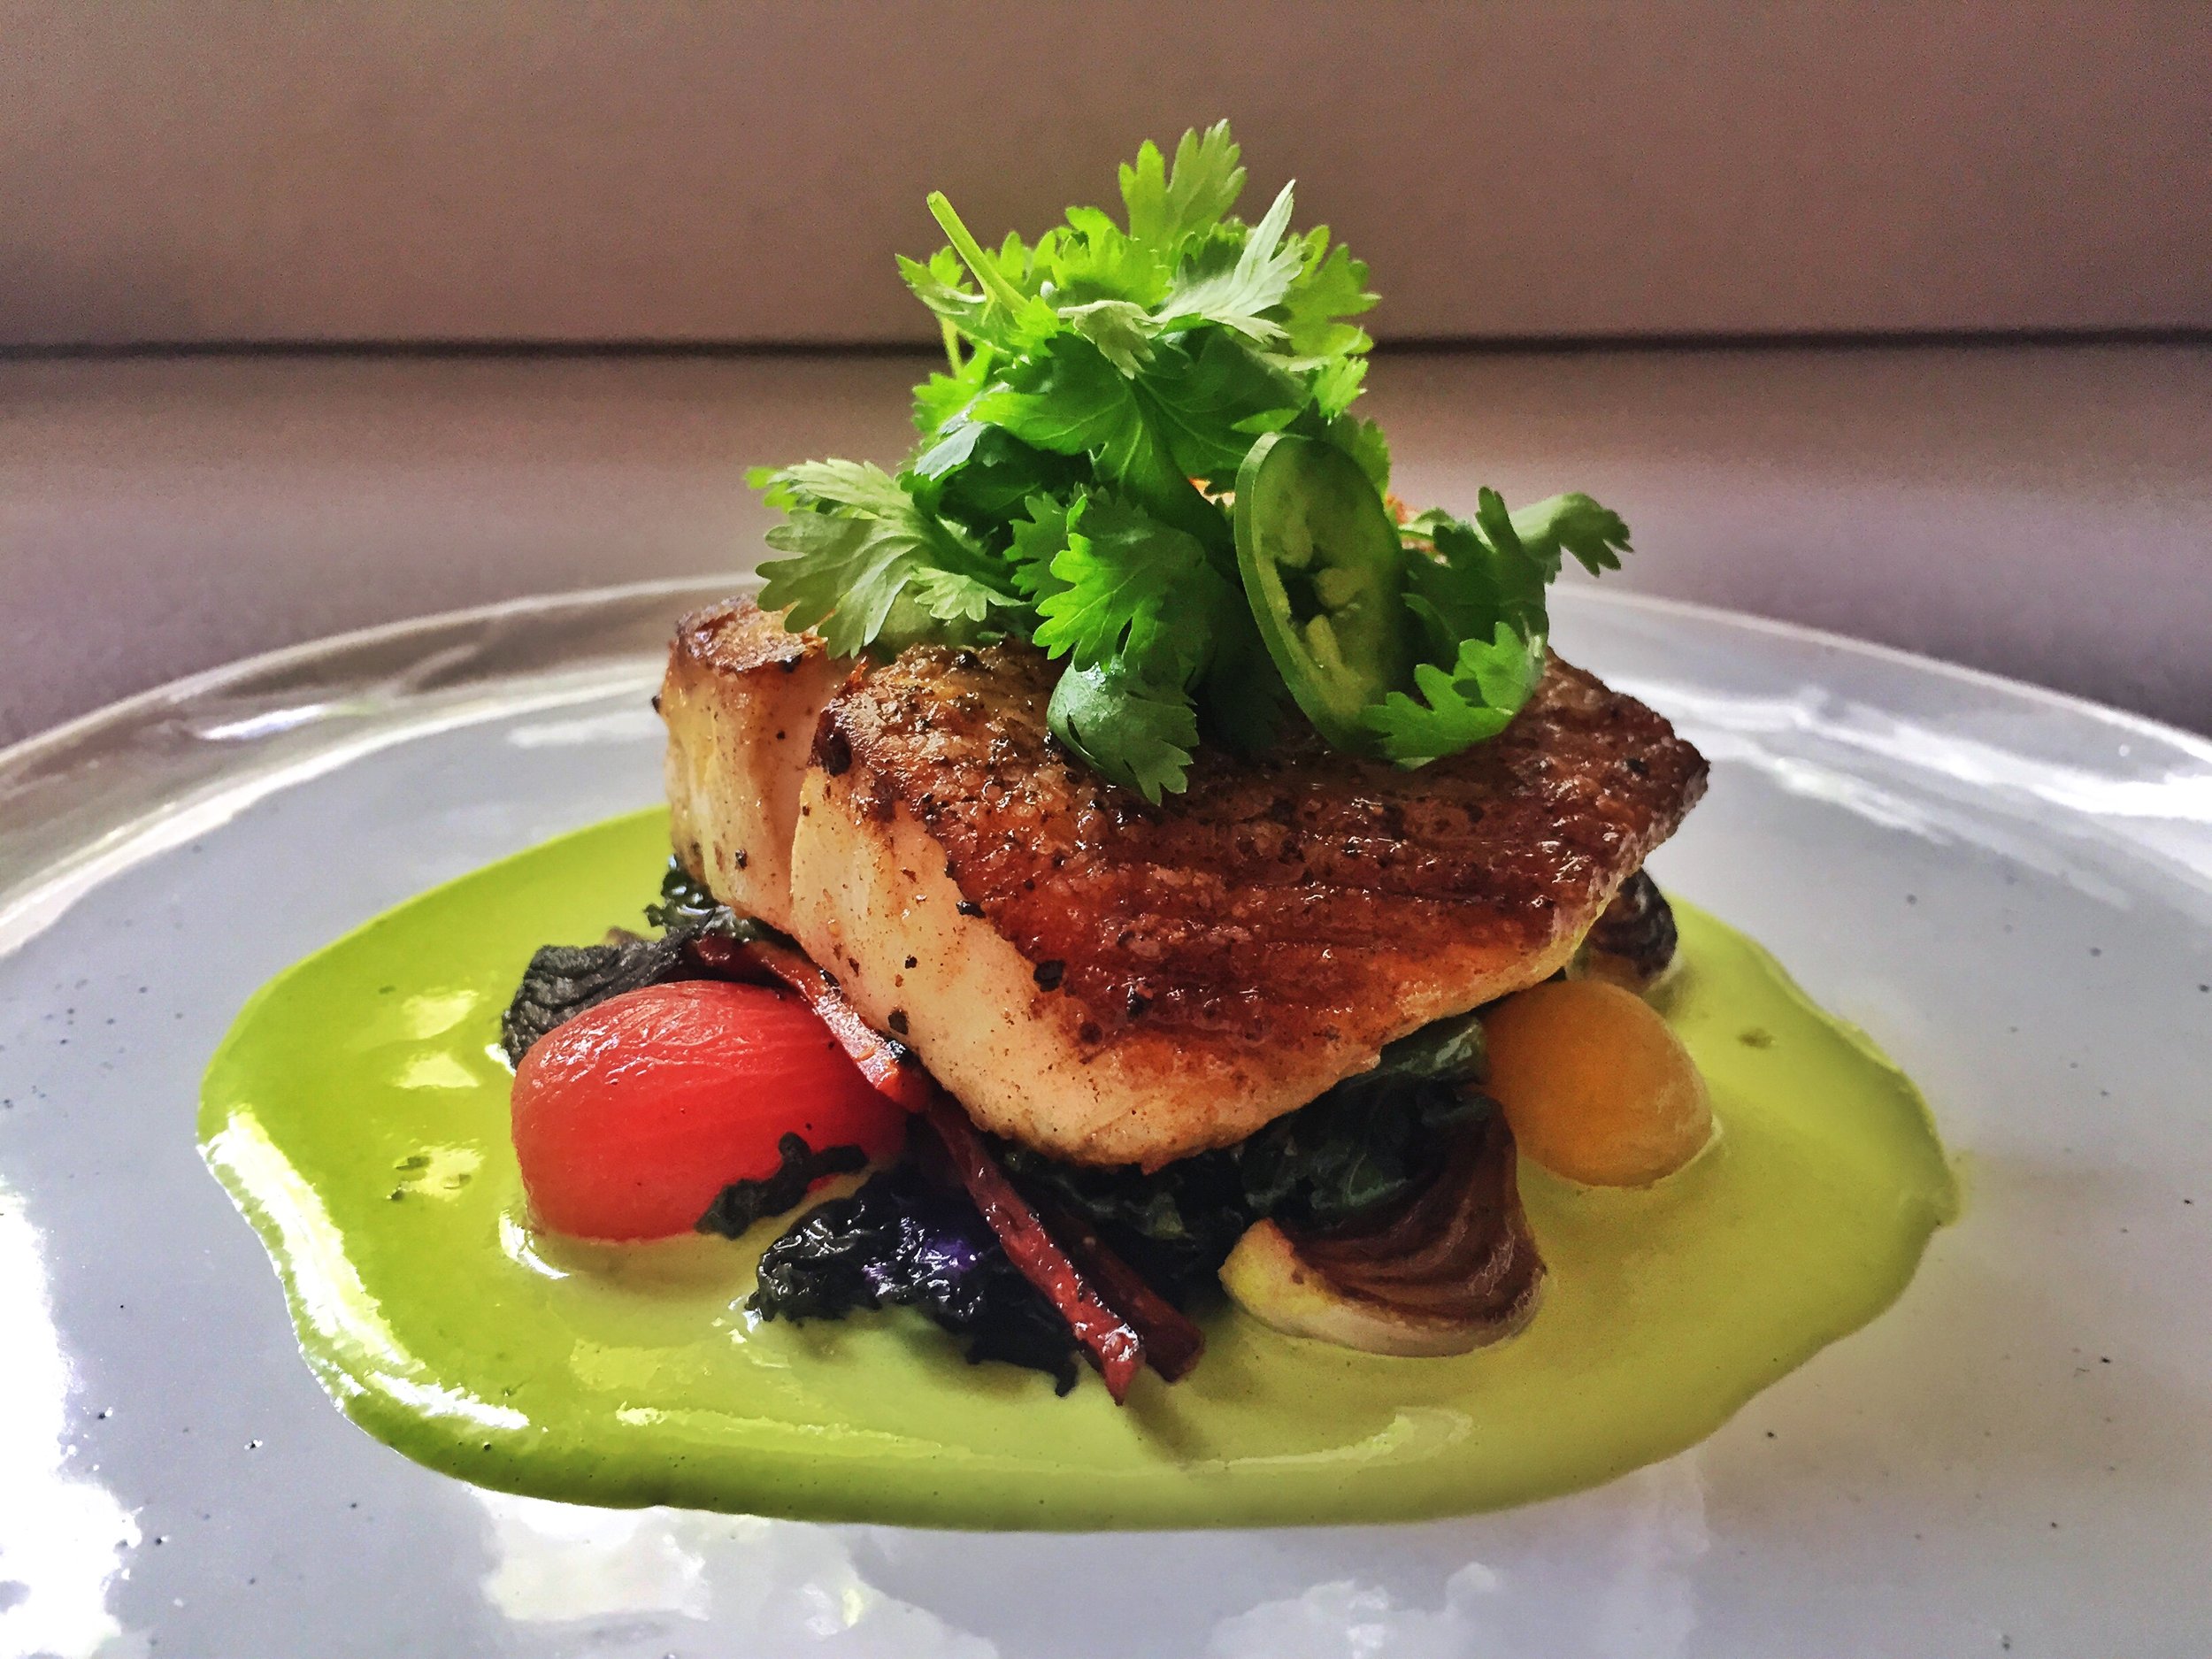 Pan roasted black grouper over charred vegetables with a cilantro salsa verde